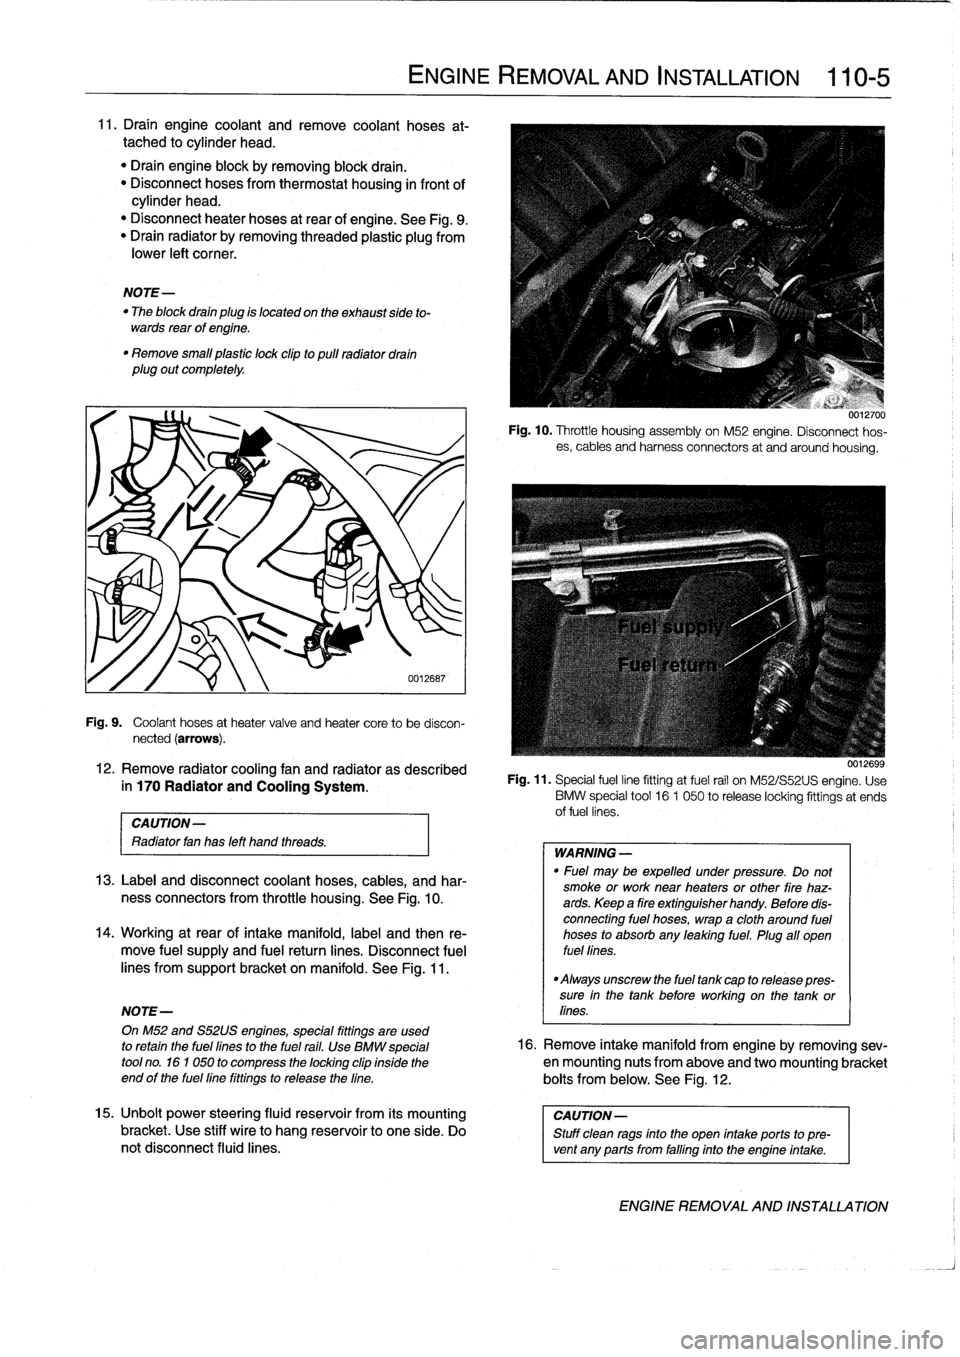 BMW 318i 1994 E36 Workshop Manual 
11
.
Draín
engine
coolant
and
Rmove
coolant
hoses
at-
tached
to
cylinder
head
.

"
Drain
engine
block
byremoving
block
drain
.
"
Disconnect
hoses
from
thermostat
housing
in
front
of
cylinder
head
.
